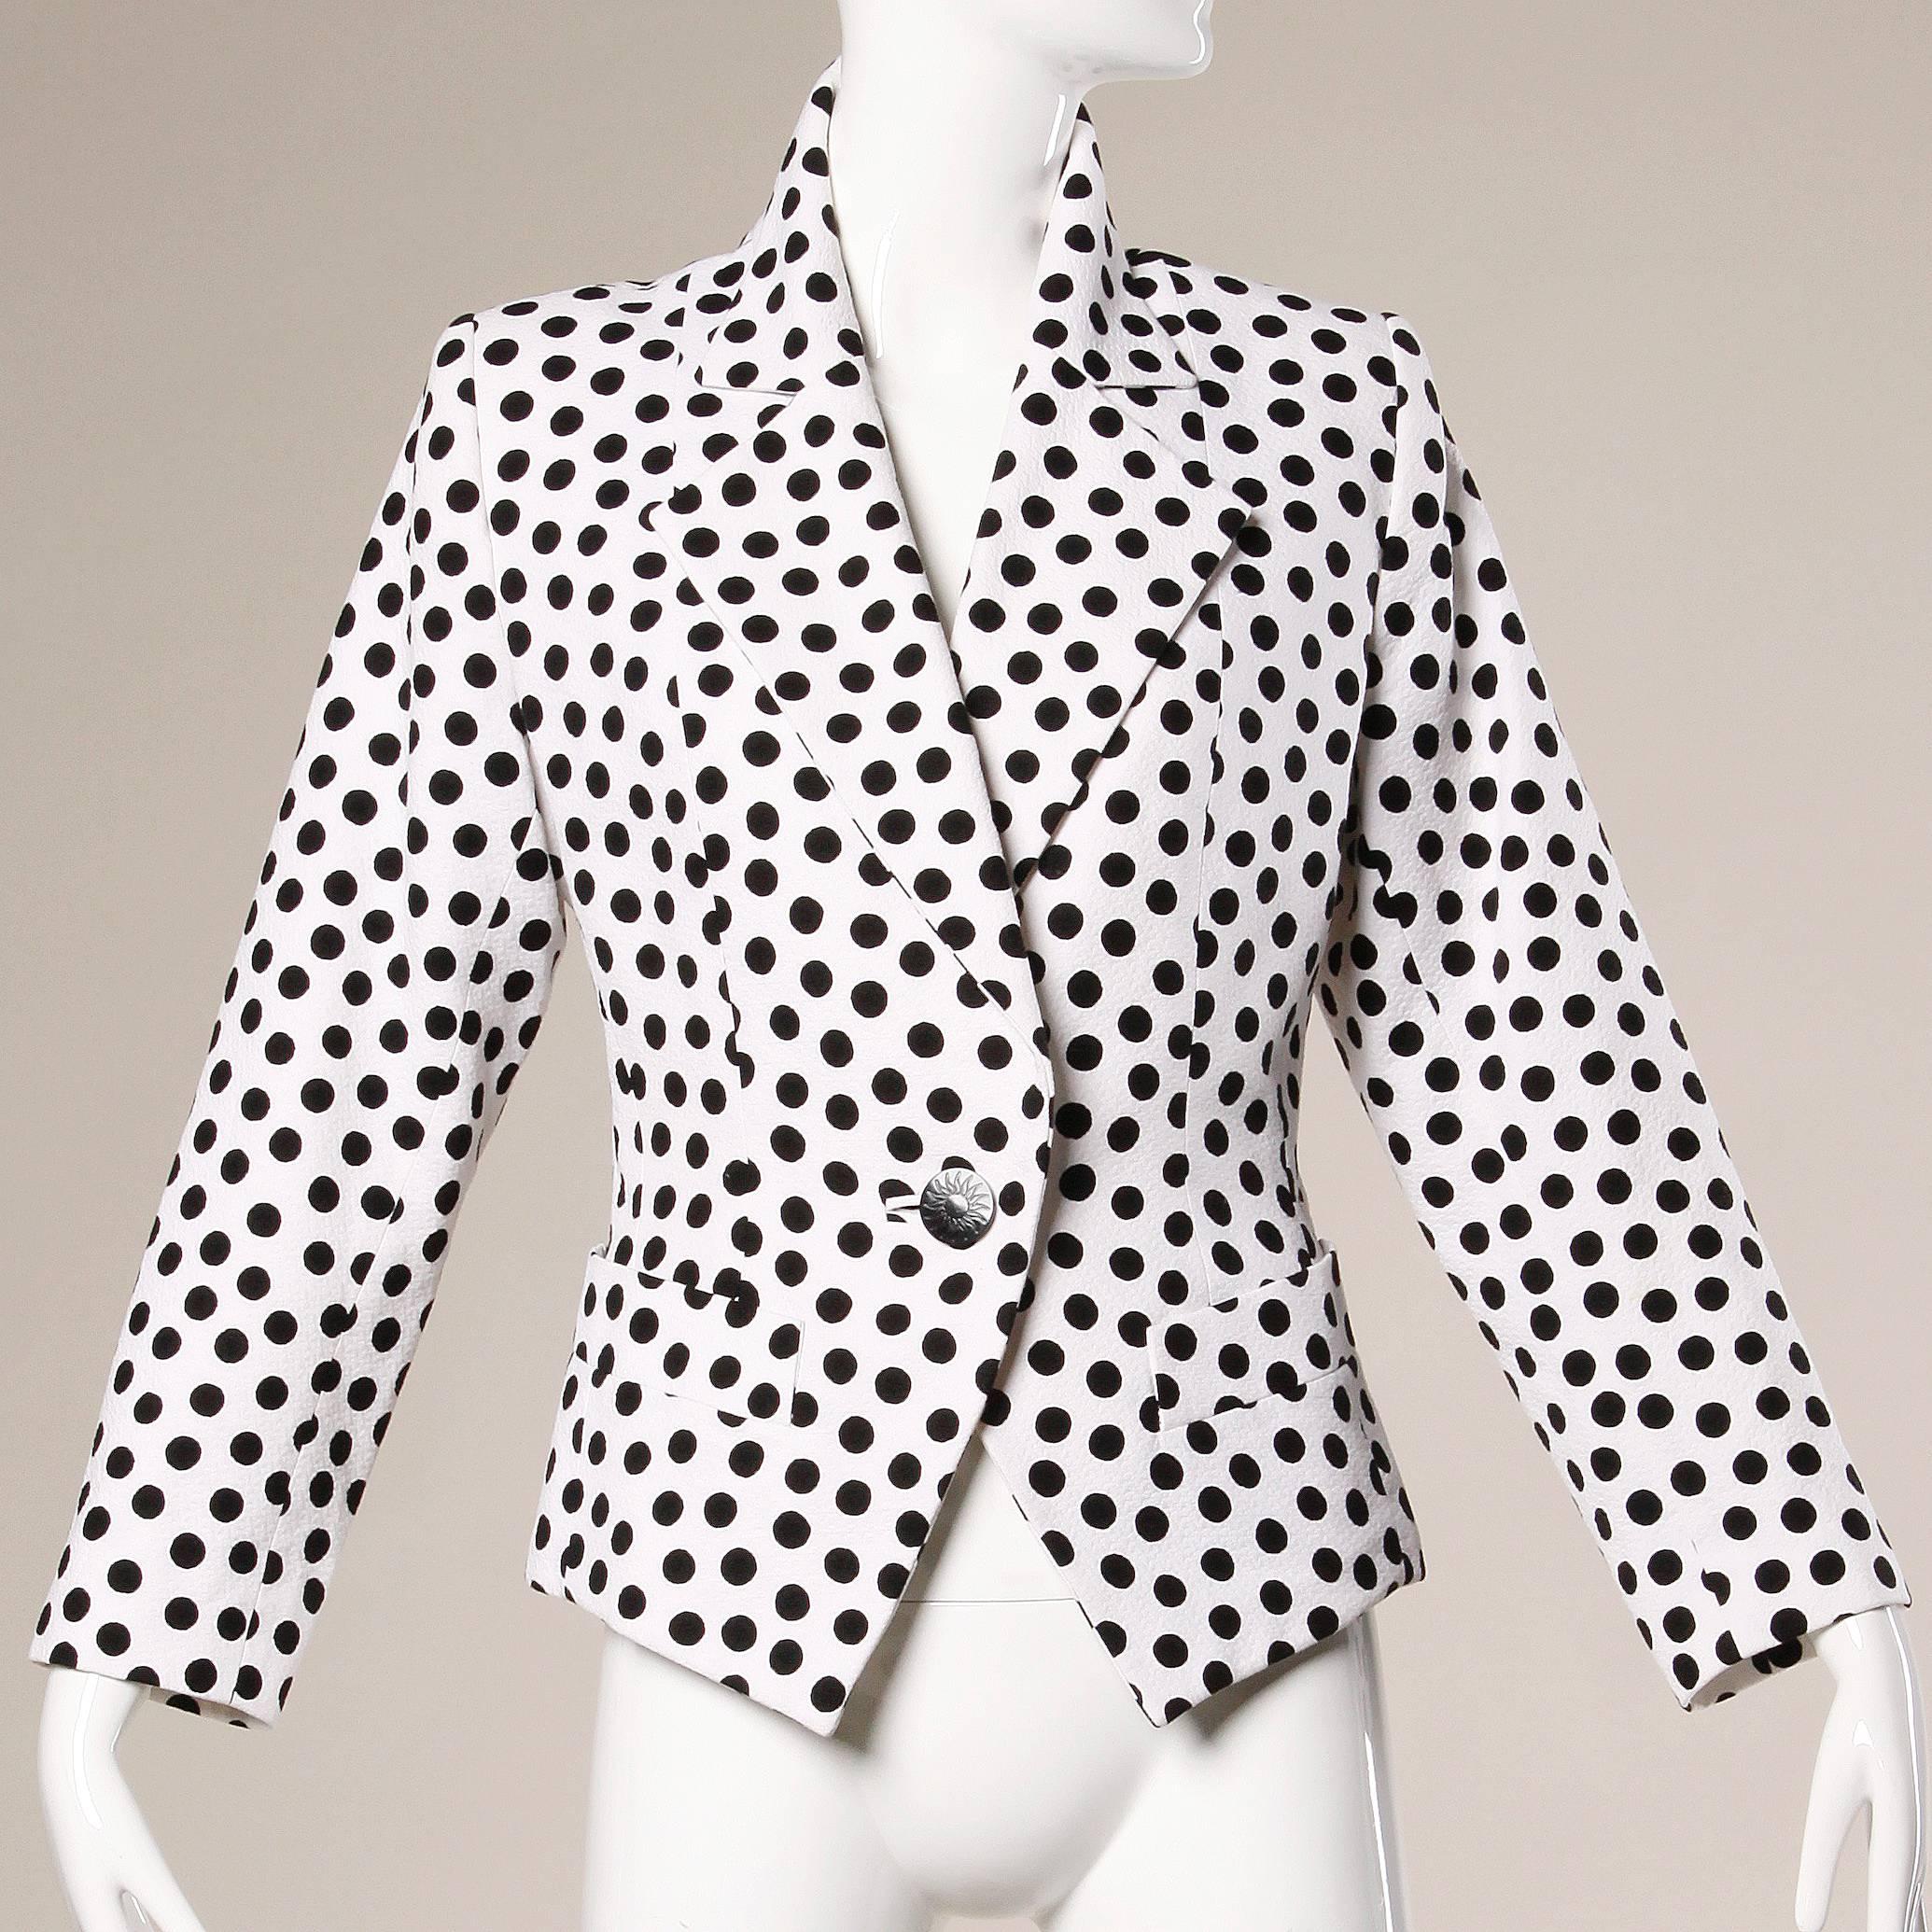 Darling black and white polka dot blazer jacket by Yves Saint Laurent Rive Gauche.

Details:

Fully Lined
Front Pockets
Front Button Closure
Marked Size: F 42
Color: White/ Black
Fabric: 100% Cotton
Label: Yves Saint Laurent